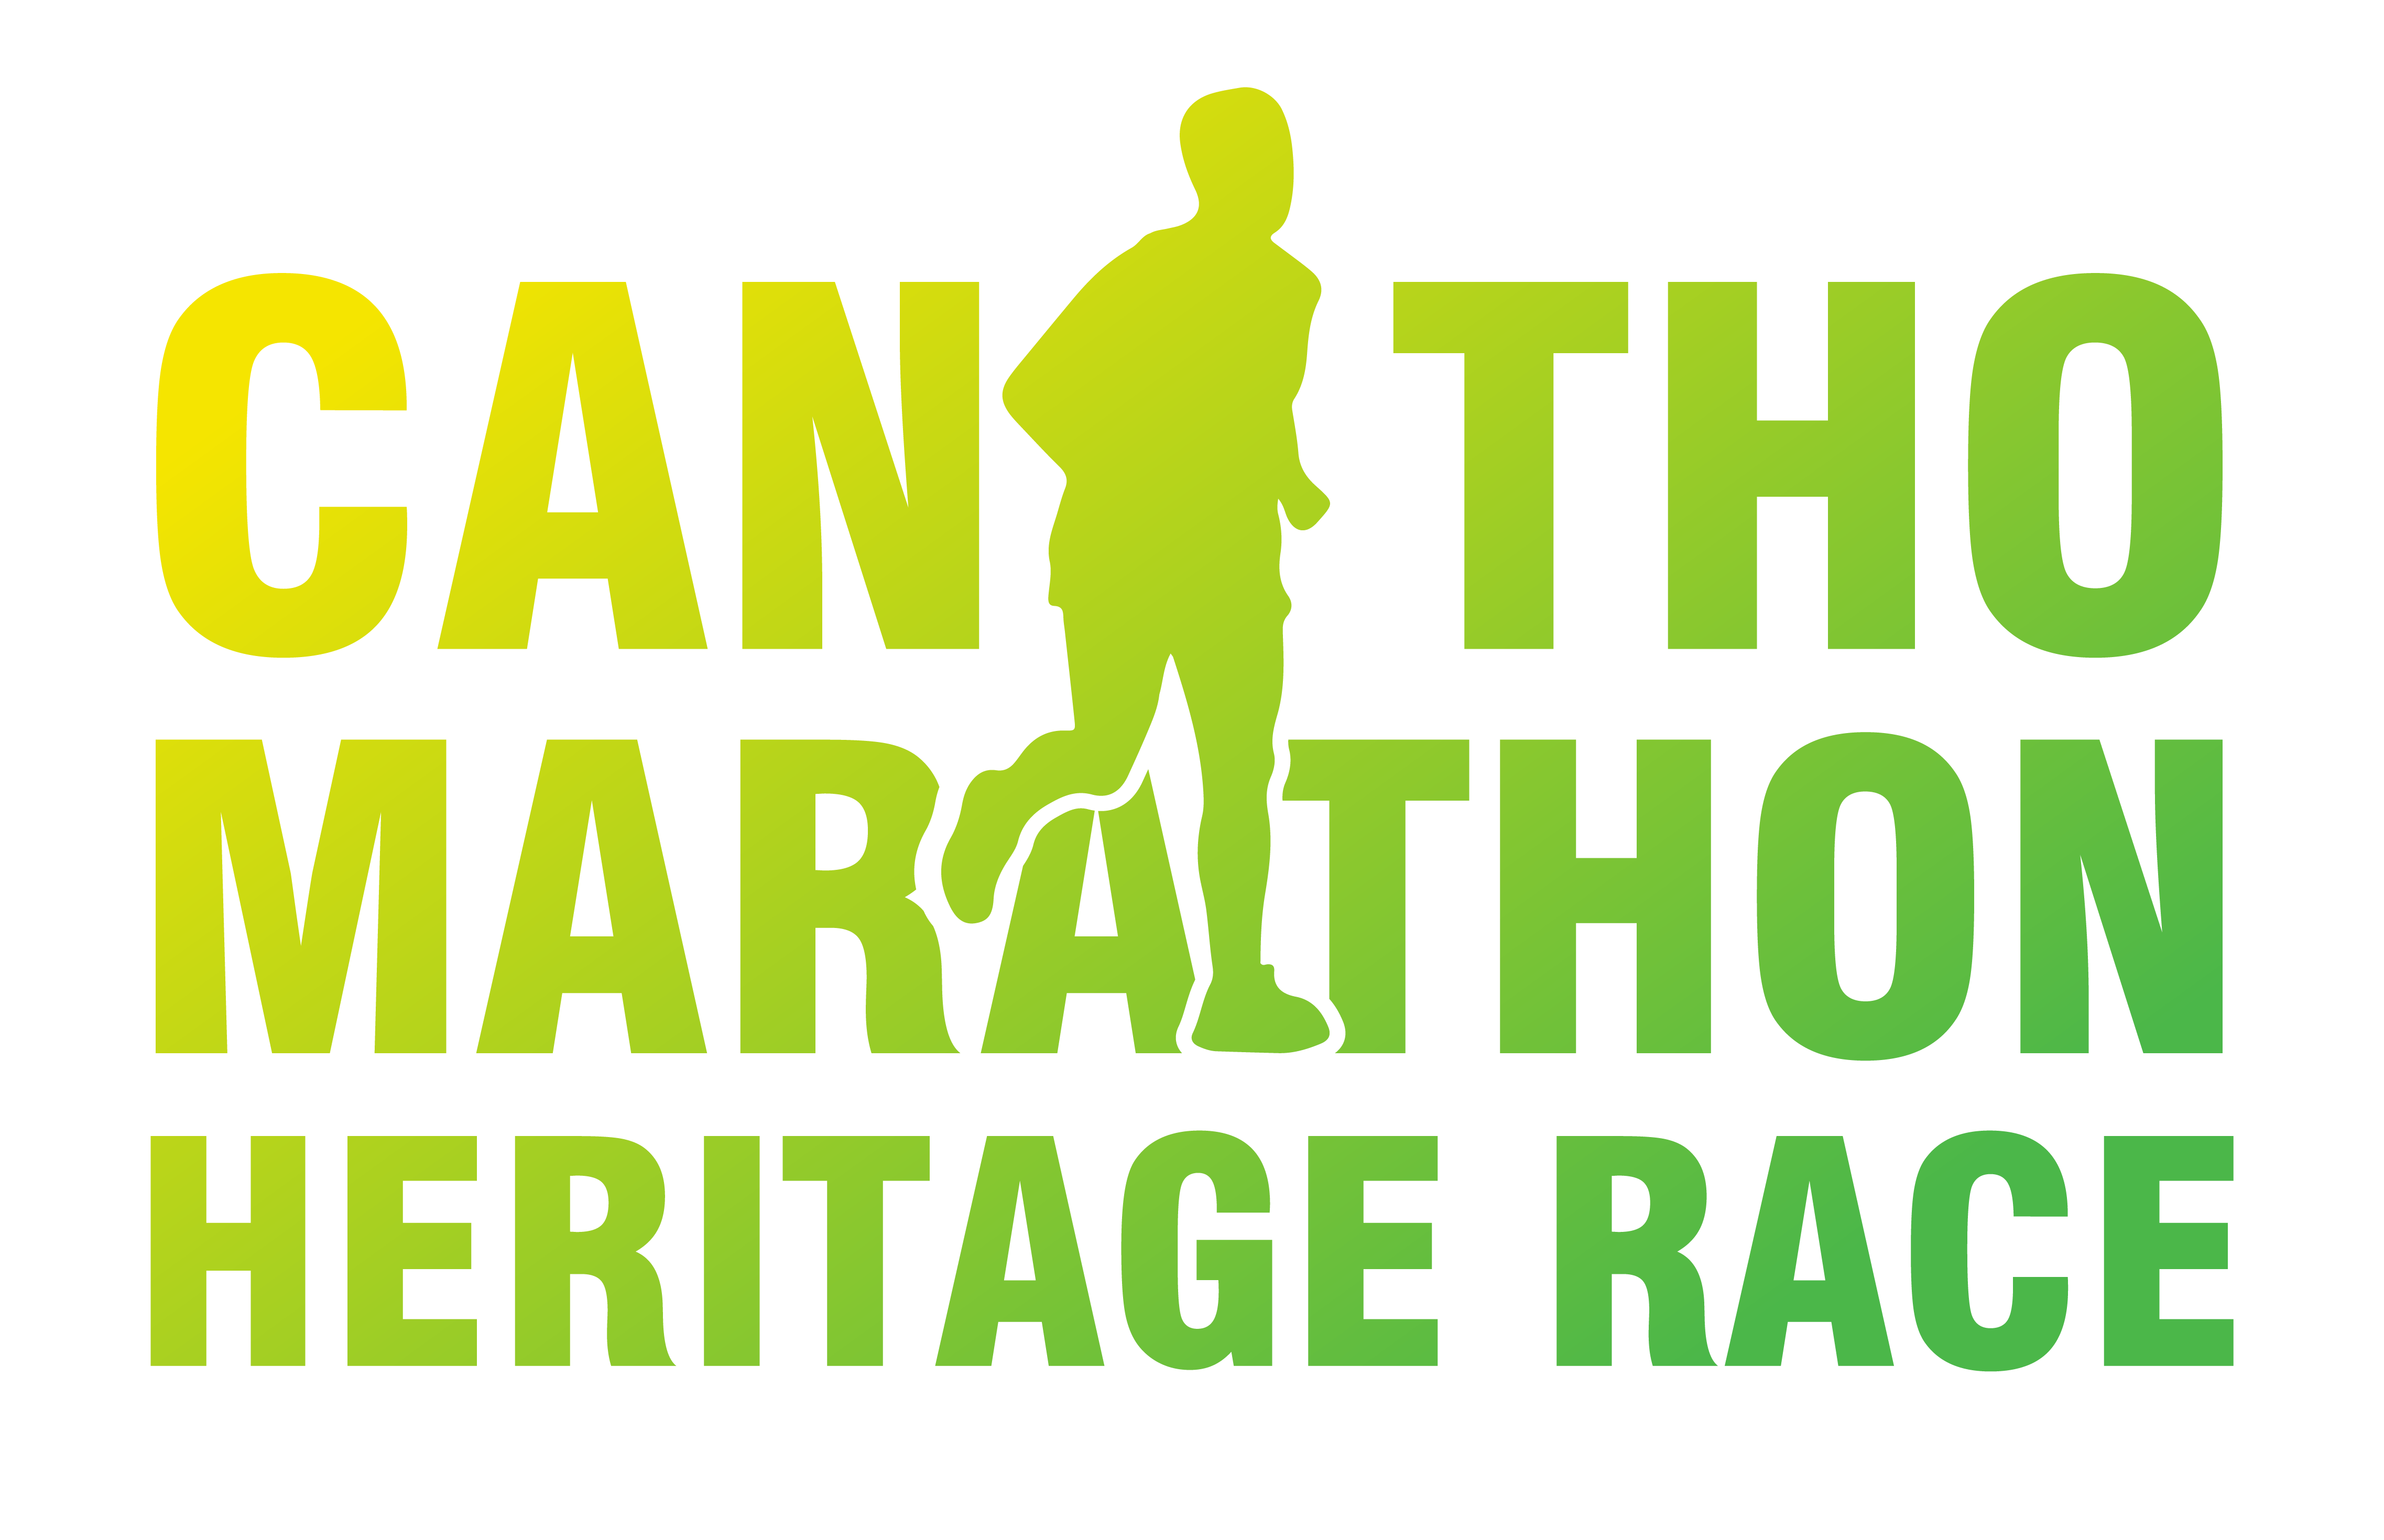 June 25 Super Preferential Rates For Can Tho Marathon – A Heritage Race